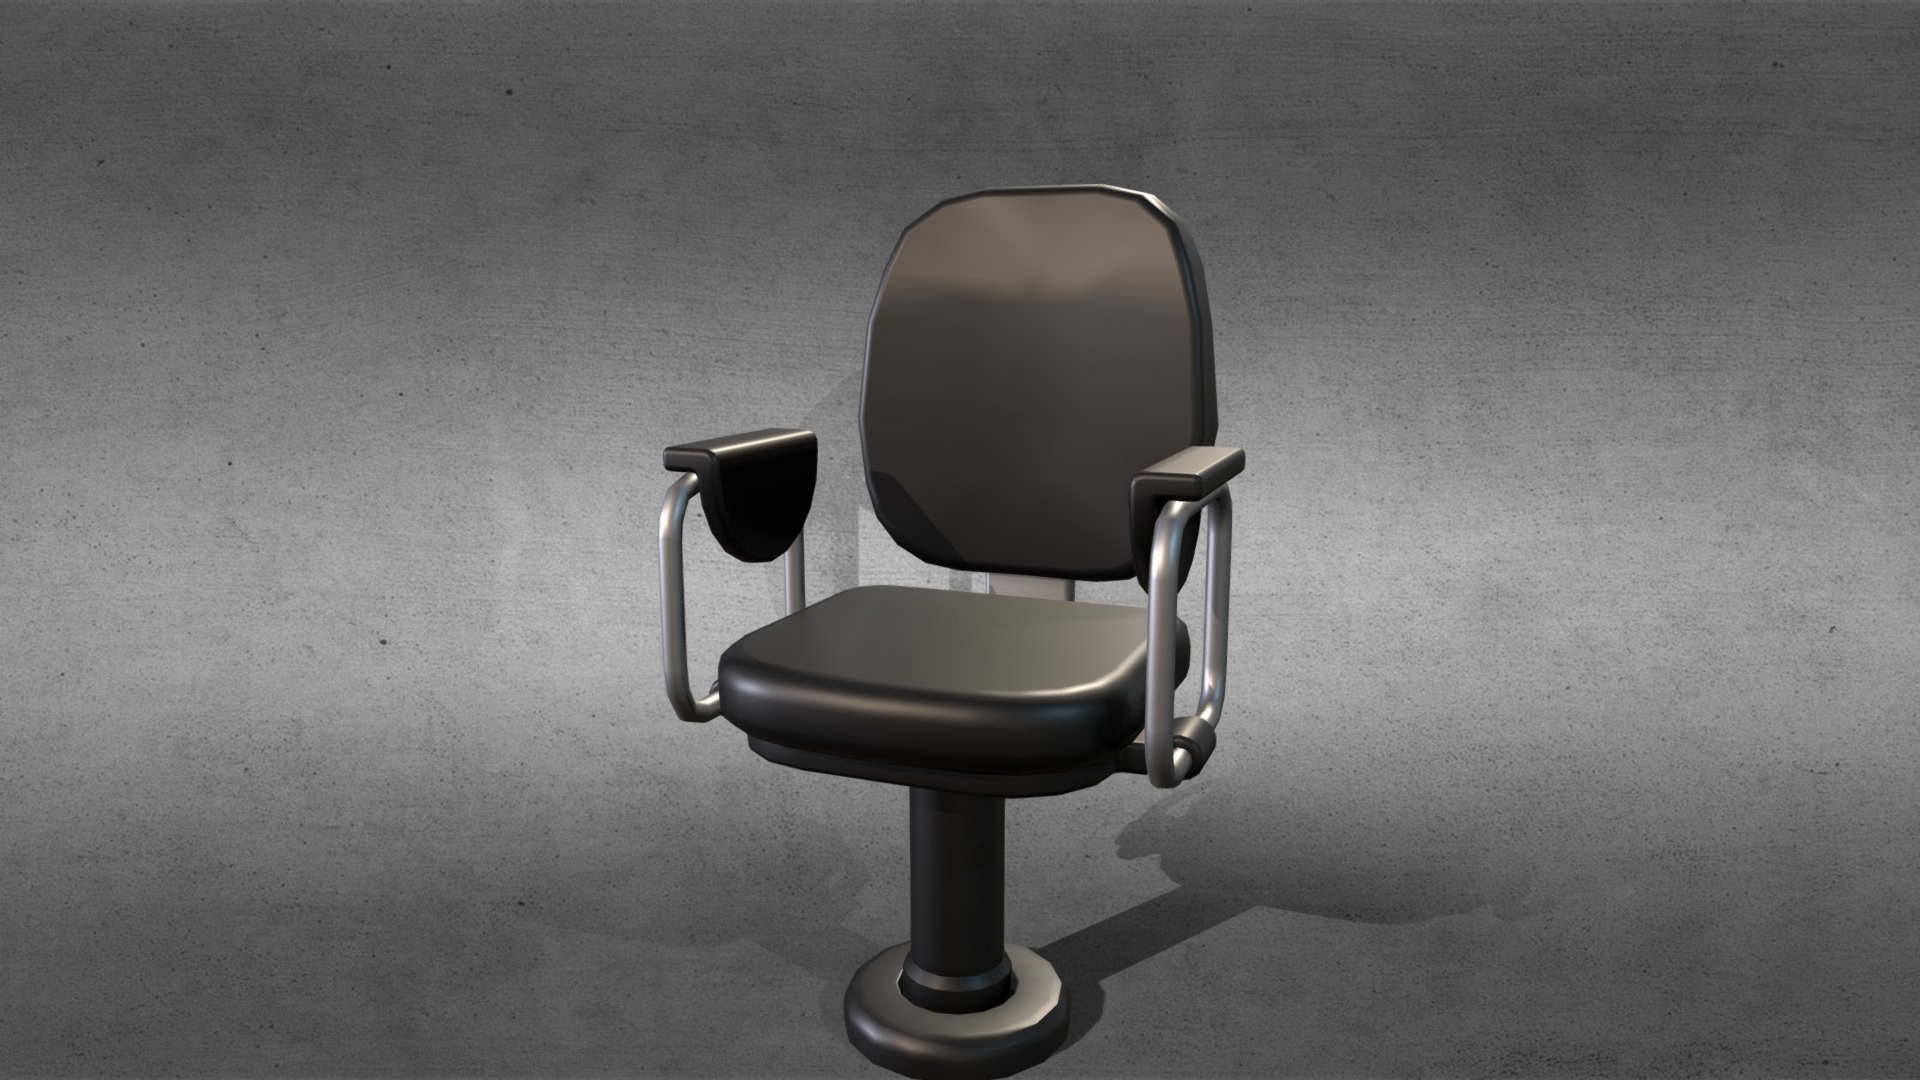 3D model Control room chair - This is a 3D model of the Control room chair. The 3D model is about a black office chair.